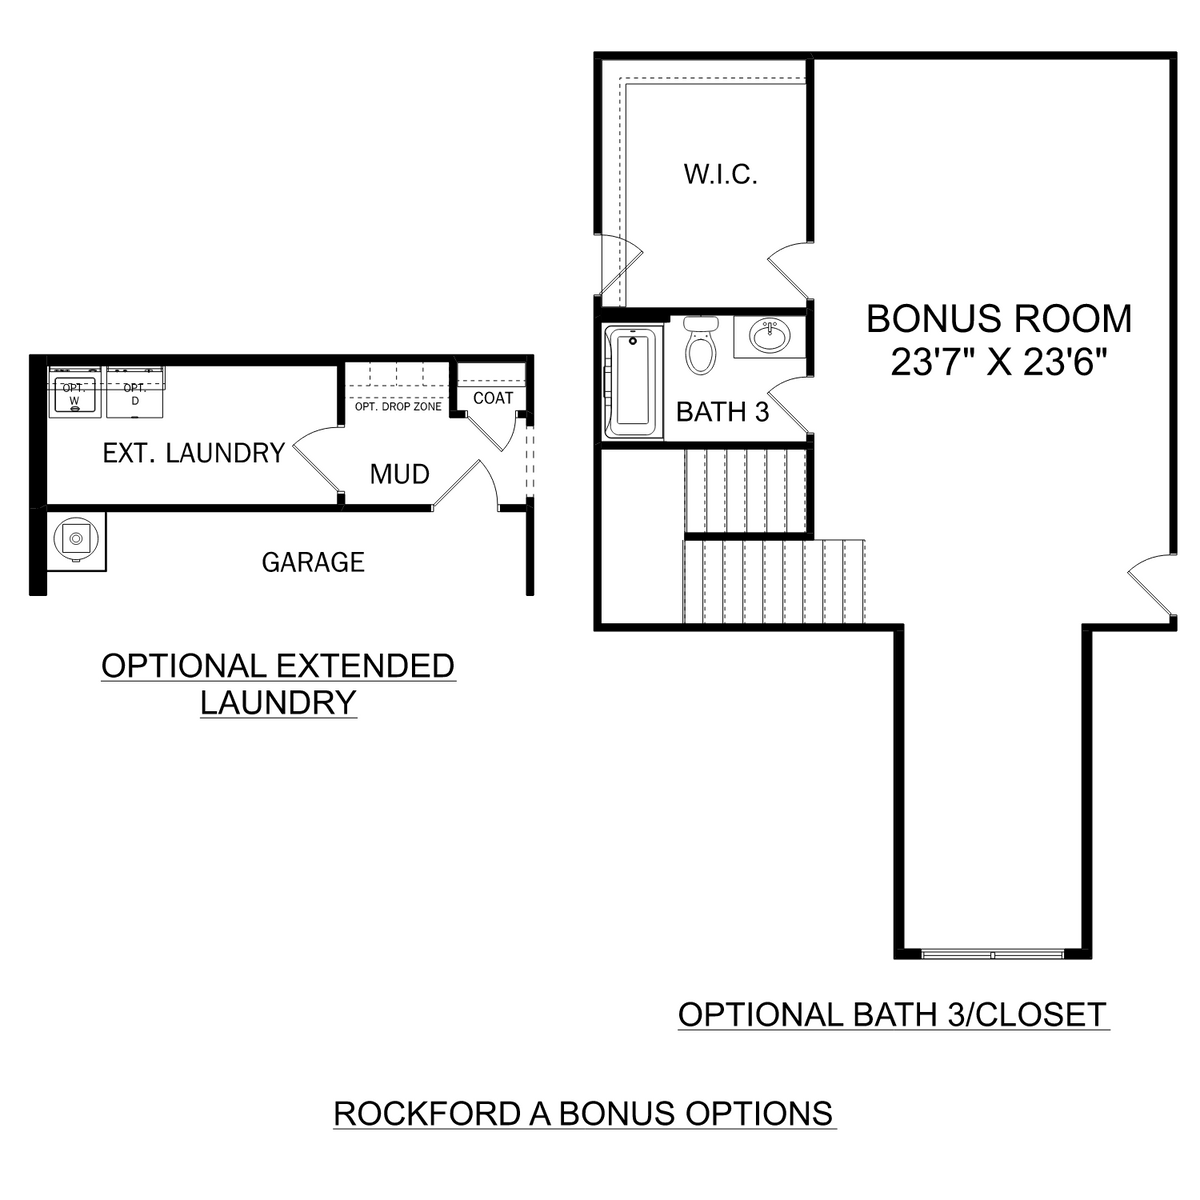 3 - The Rockford with Bonus buildable floor plan layout in Davidson Homes' Creekside community.